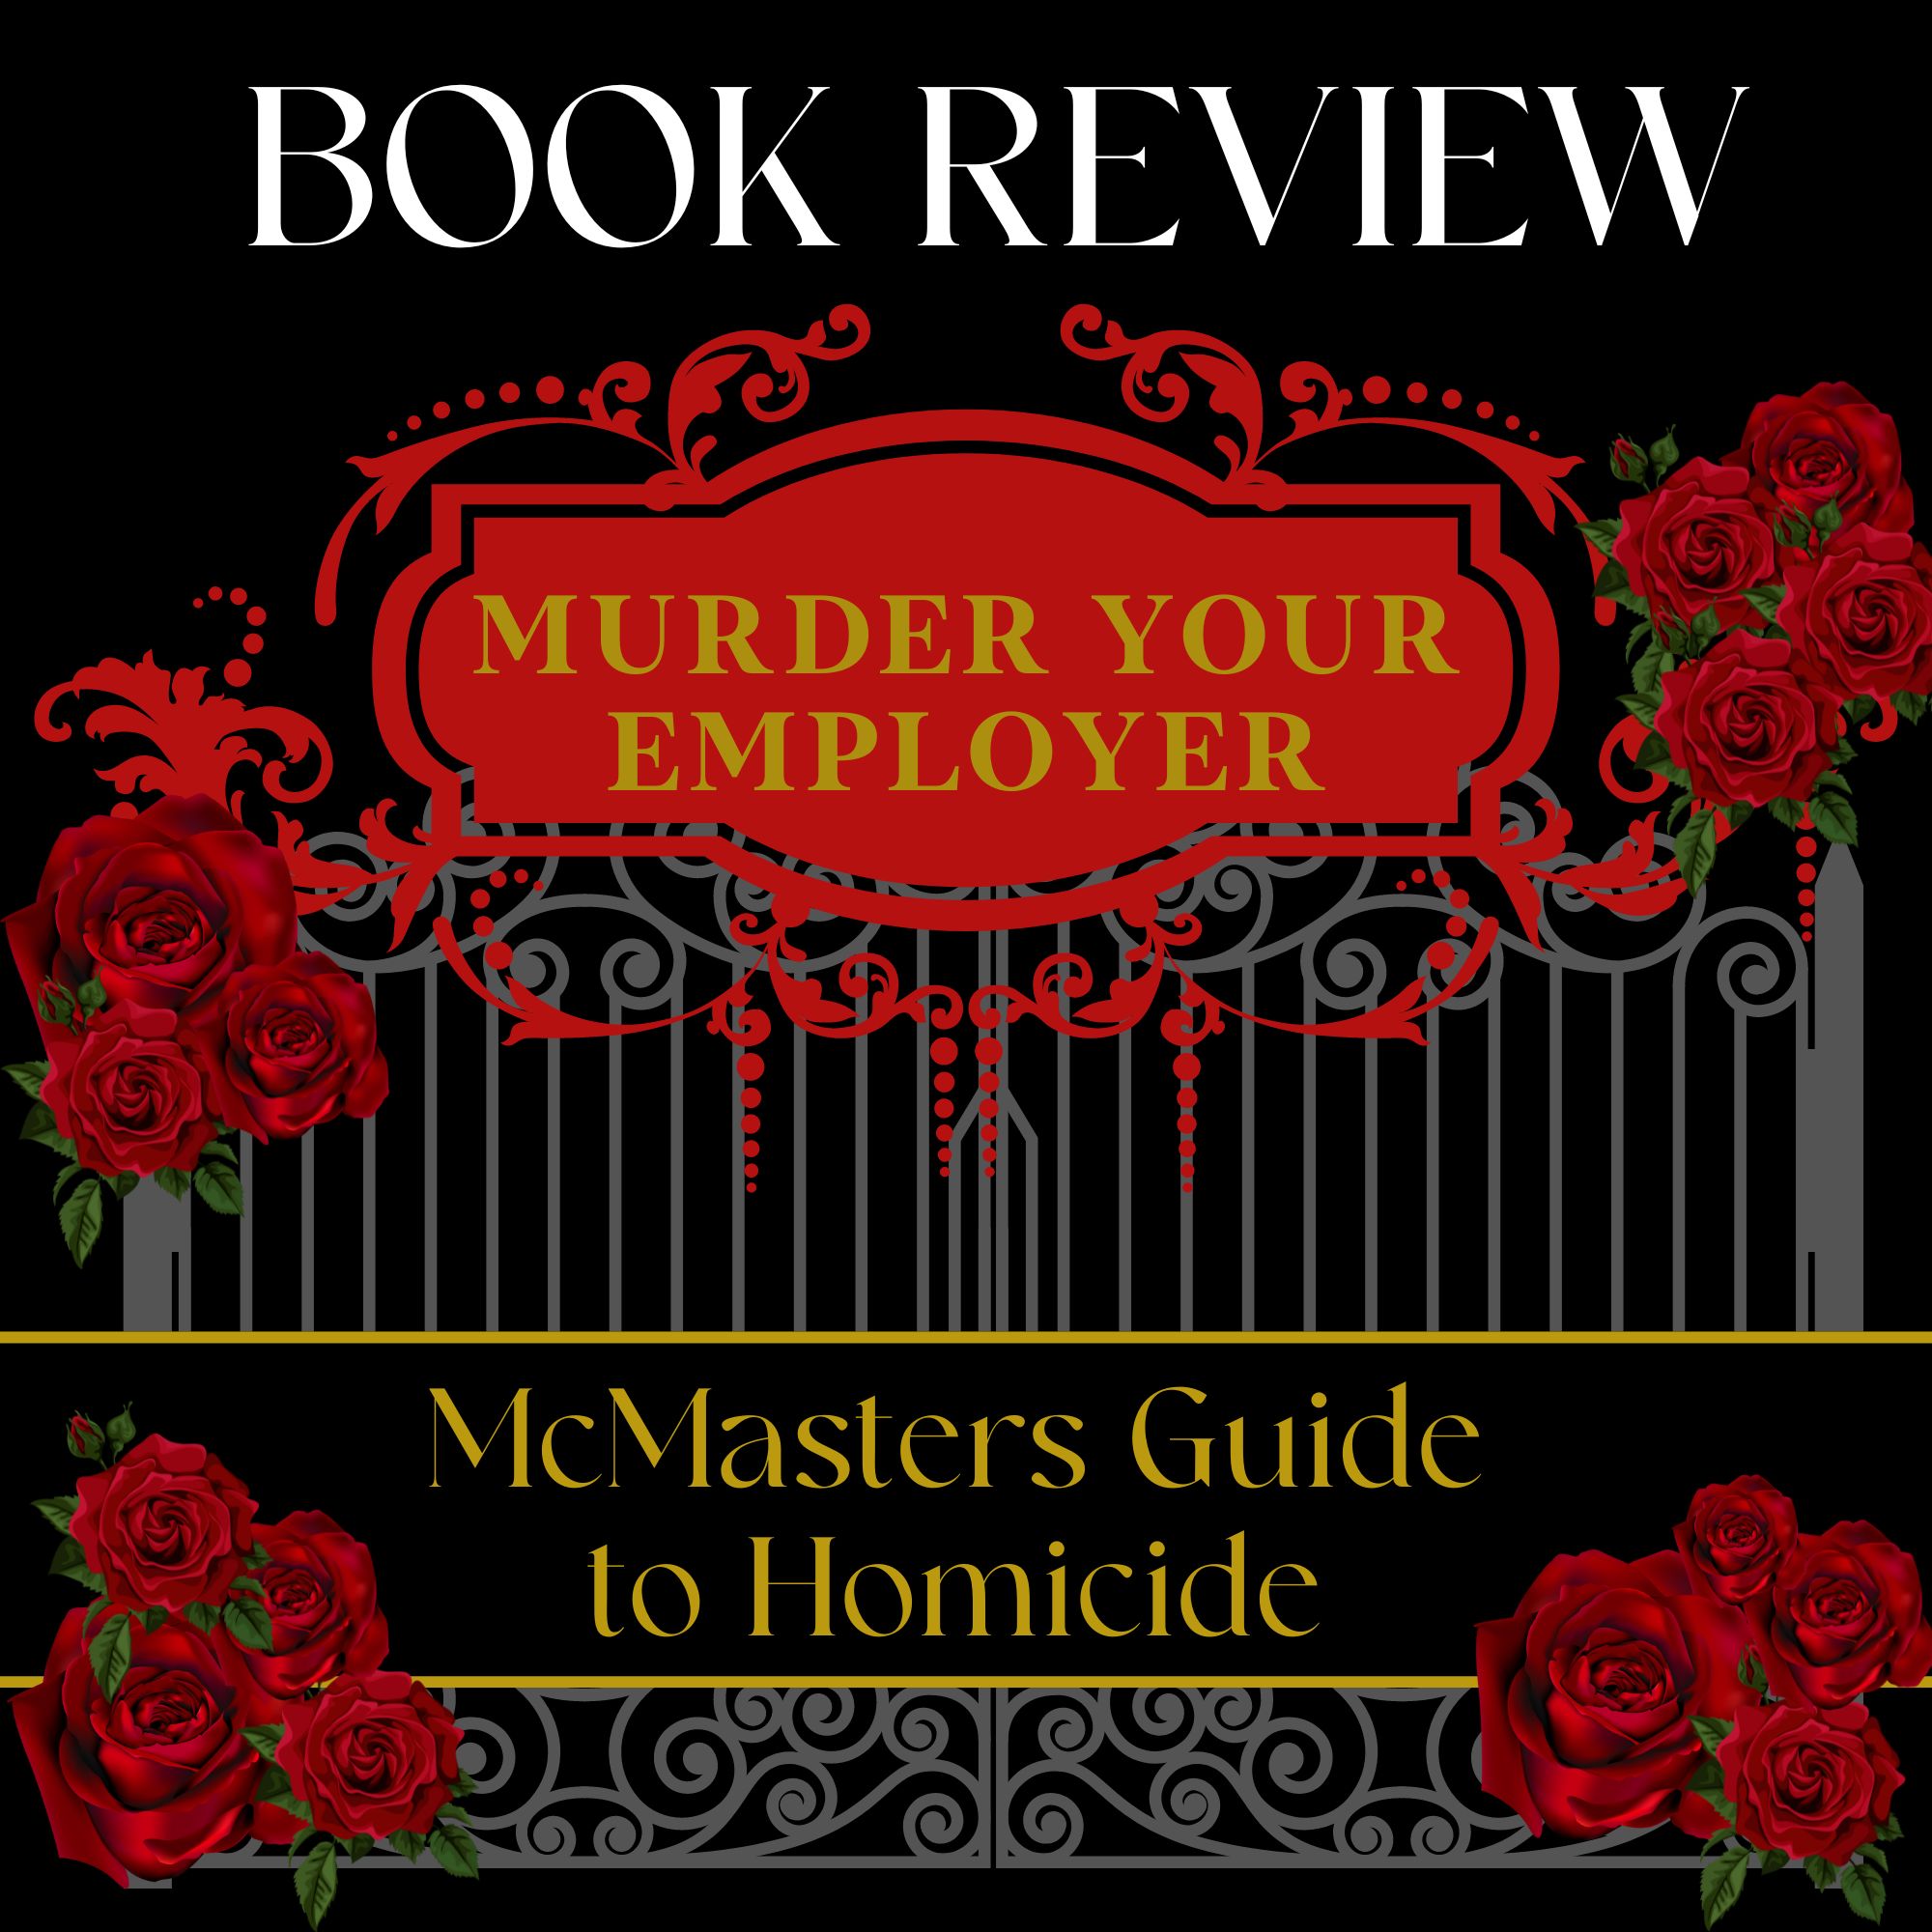 Good Reads Challenge Book Review:  Murder Your Employer: The McMasters Guide to Homicide